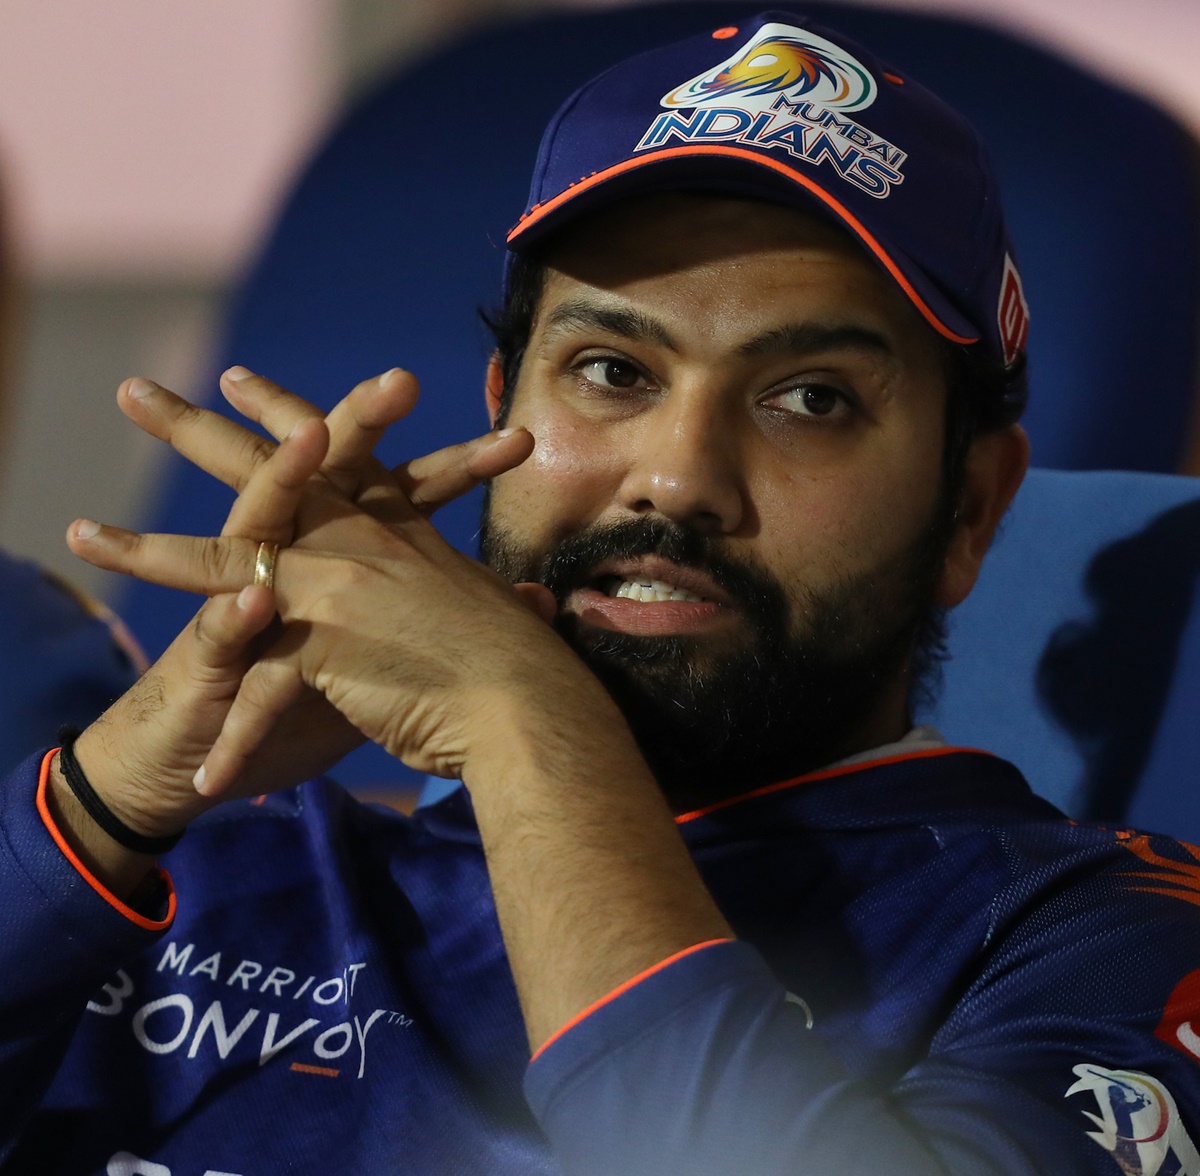 Revealed: Why Rohit didn't travel with Team India